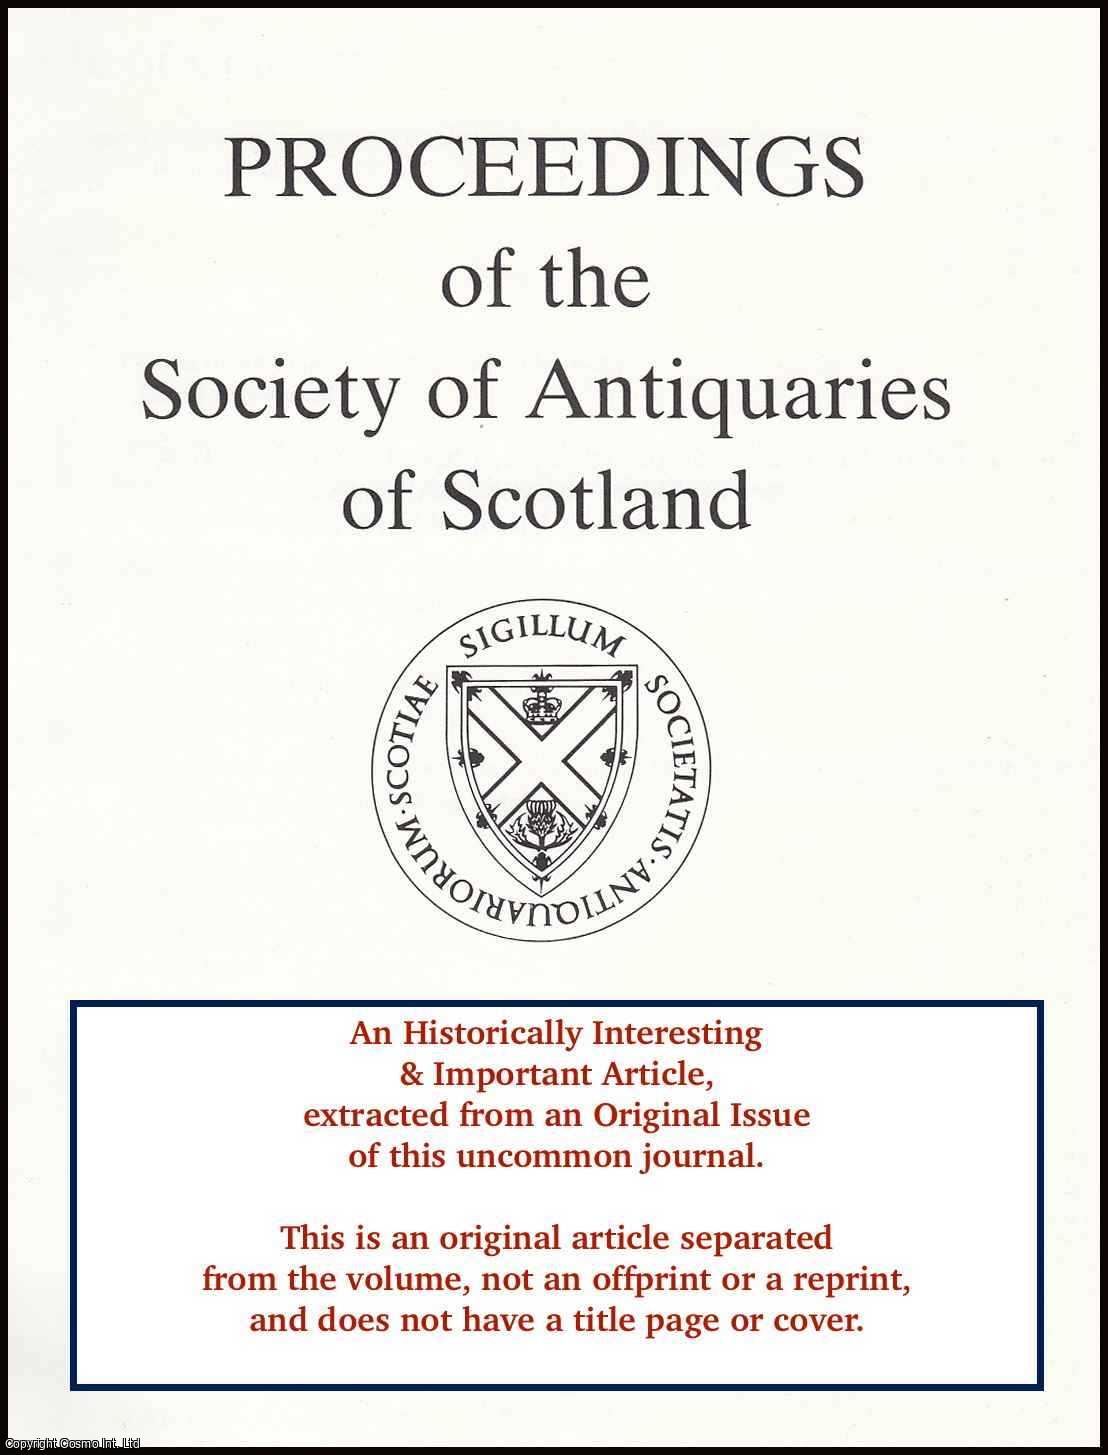 John Lewis - Excavations at The Former Lauder Technical College, Dunfermline. An original article from the Proceedings of the Society of Antiquaries of Scotland, 1995.